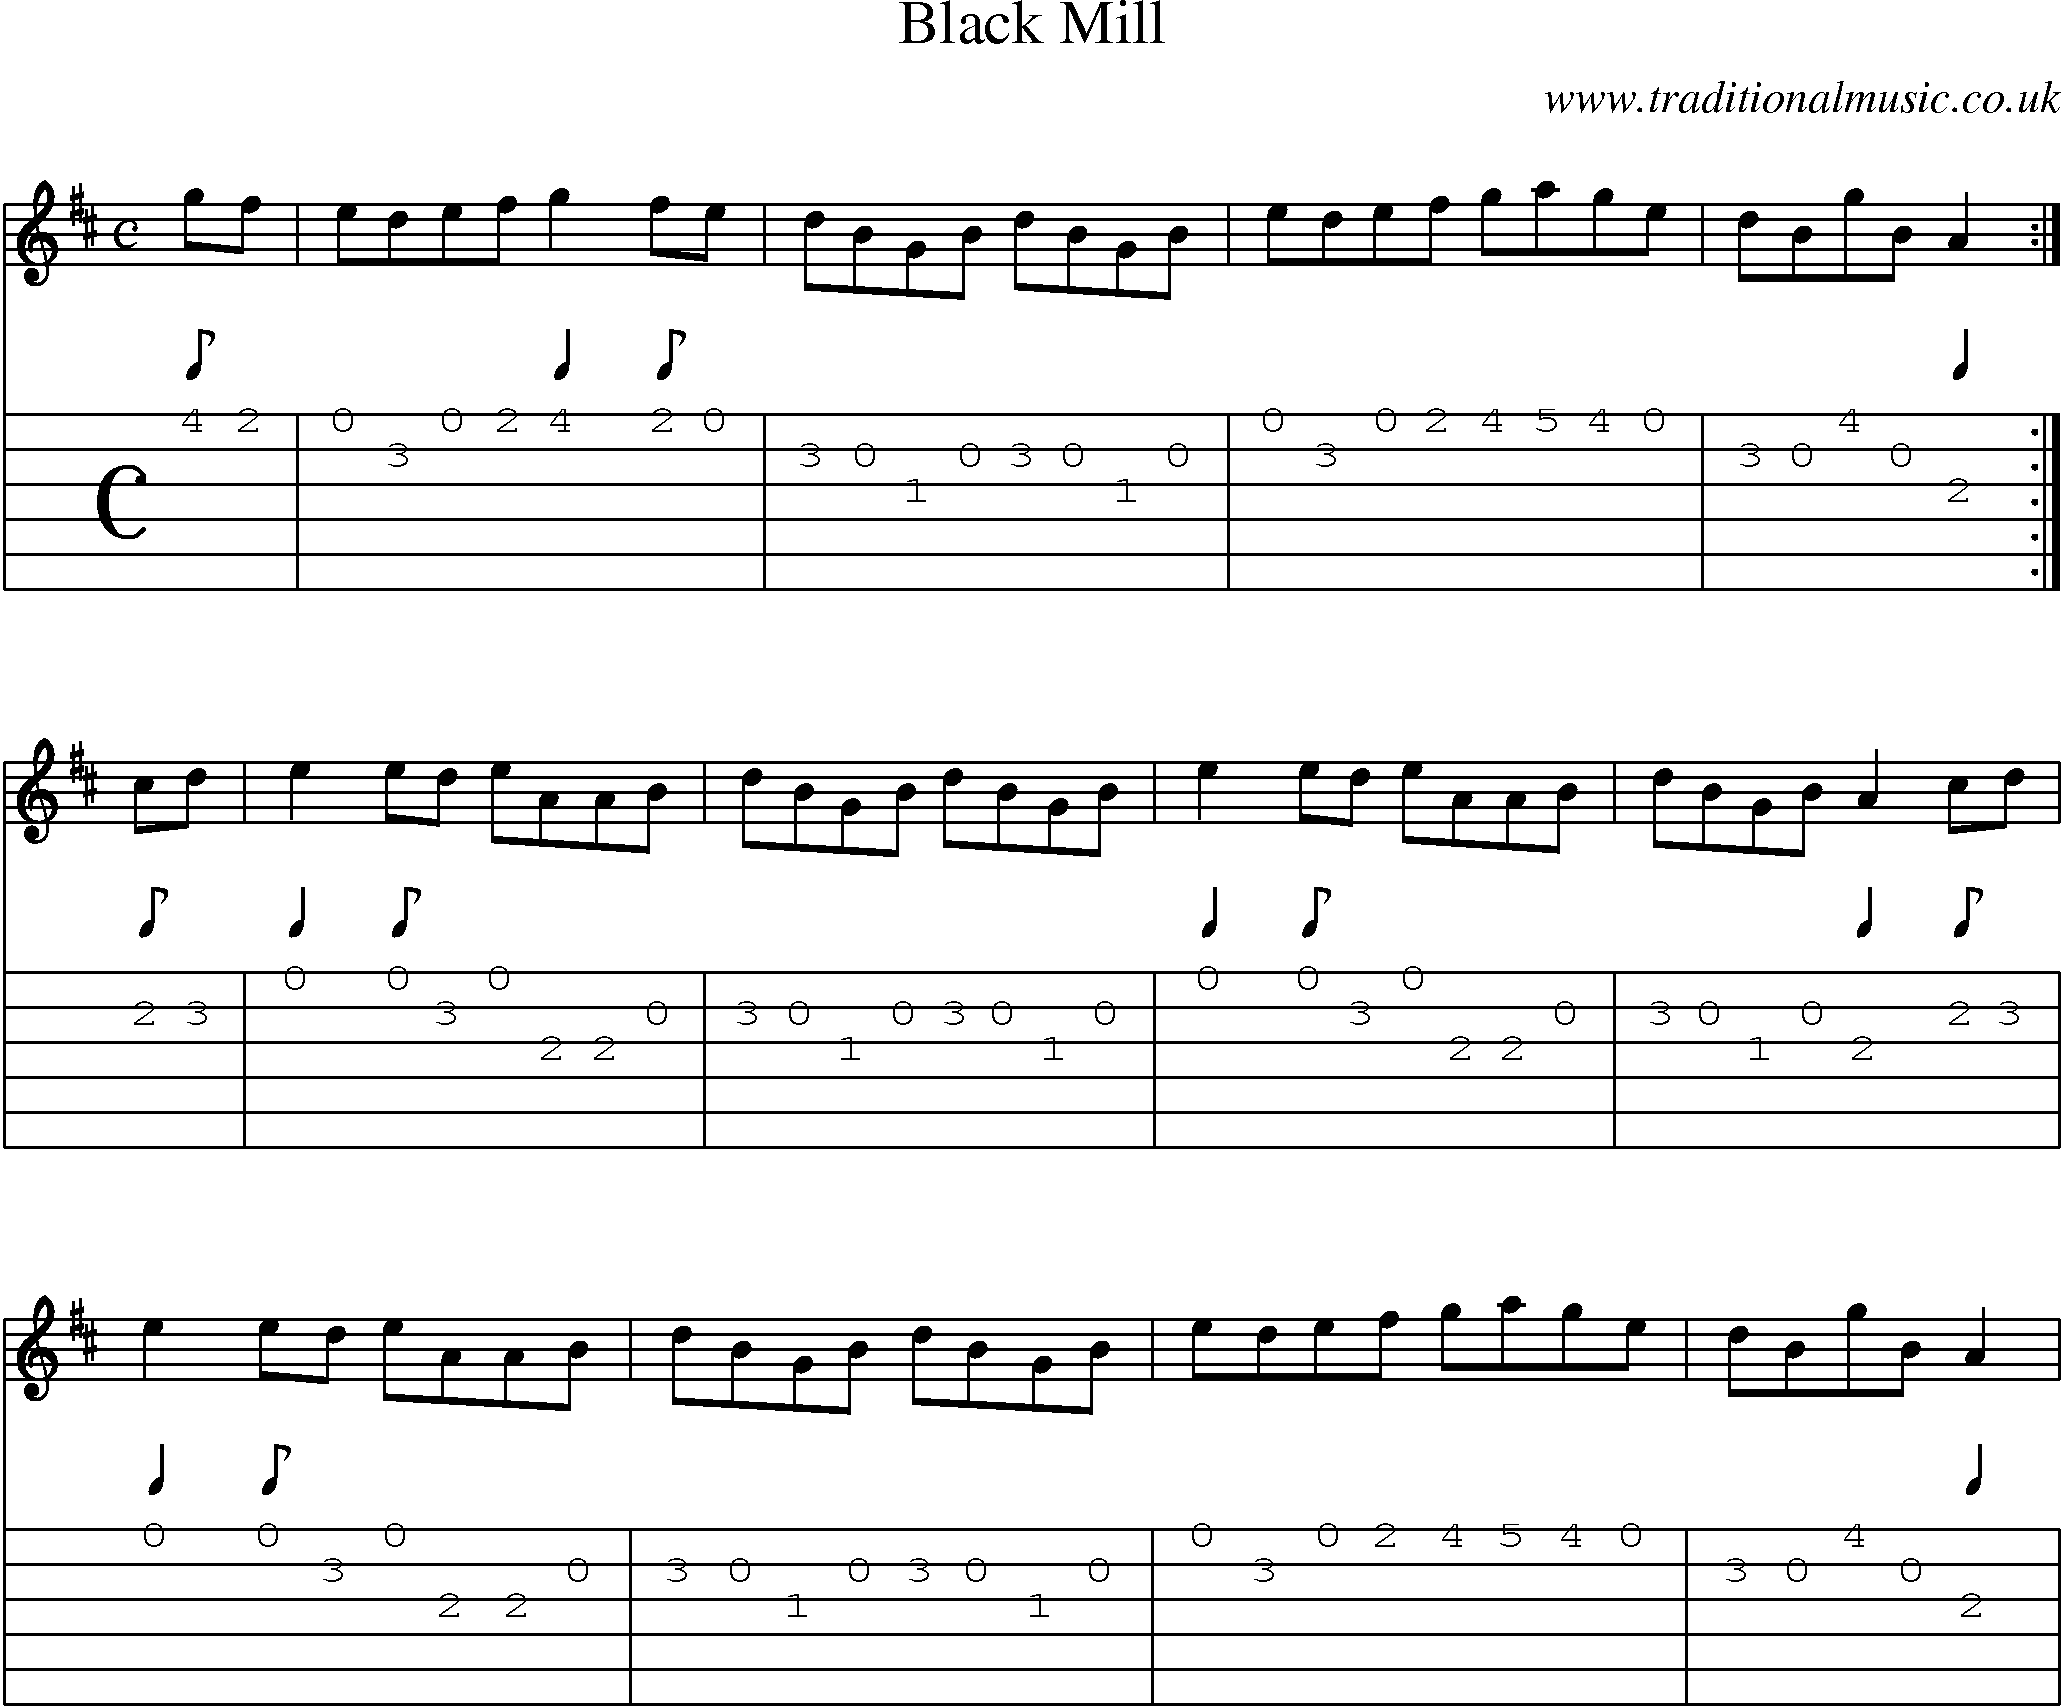 Music Score and Guitar Tabs for Black Mill